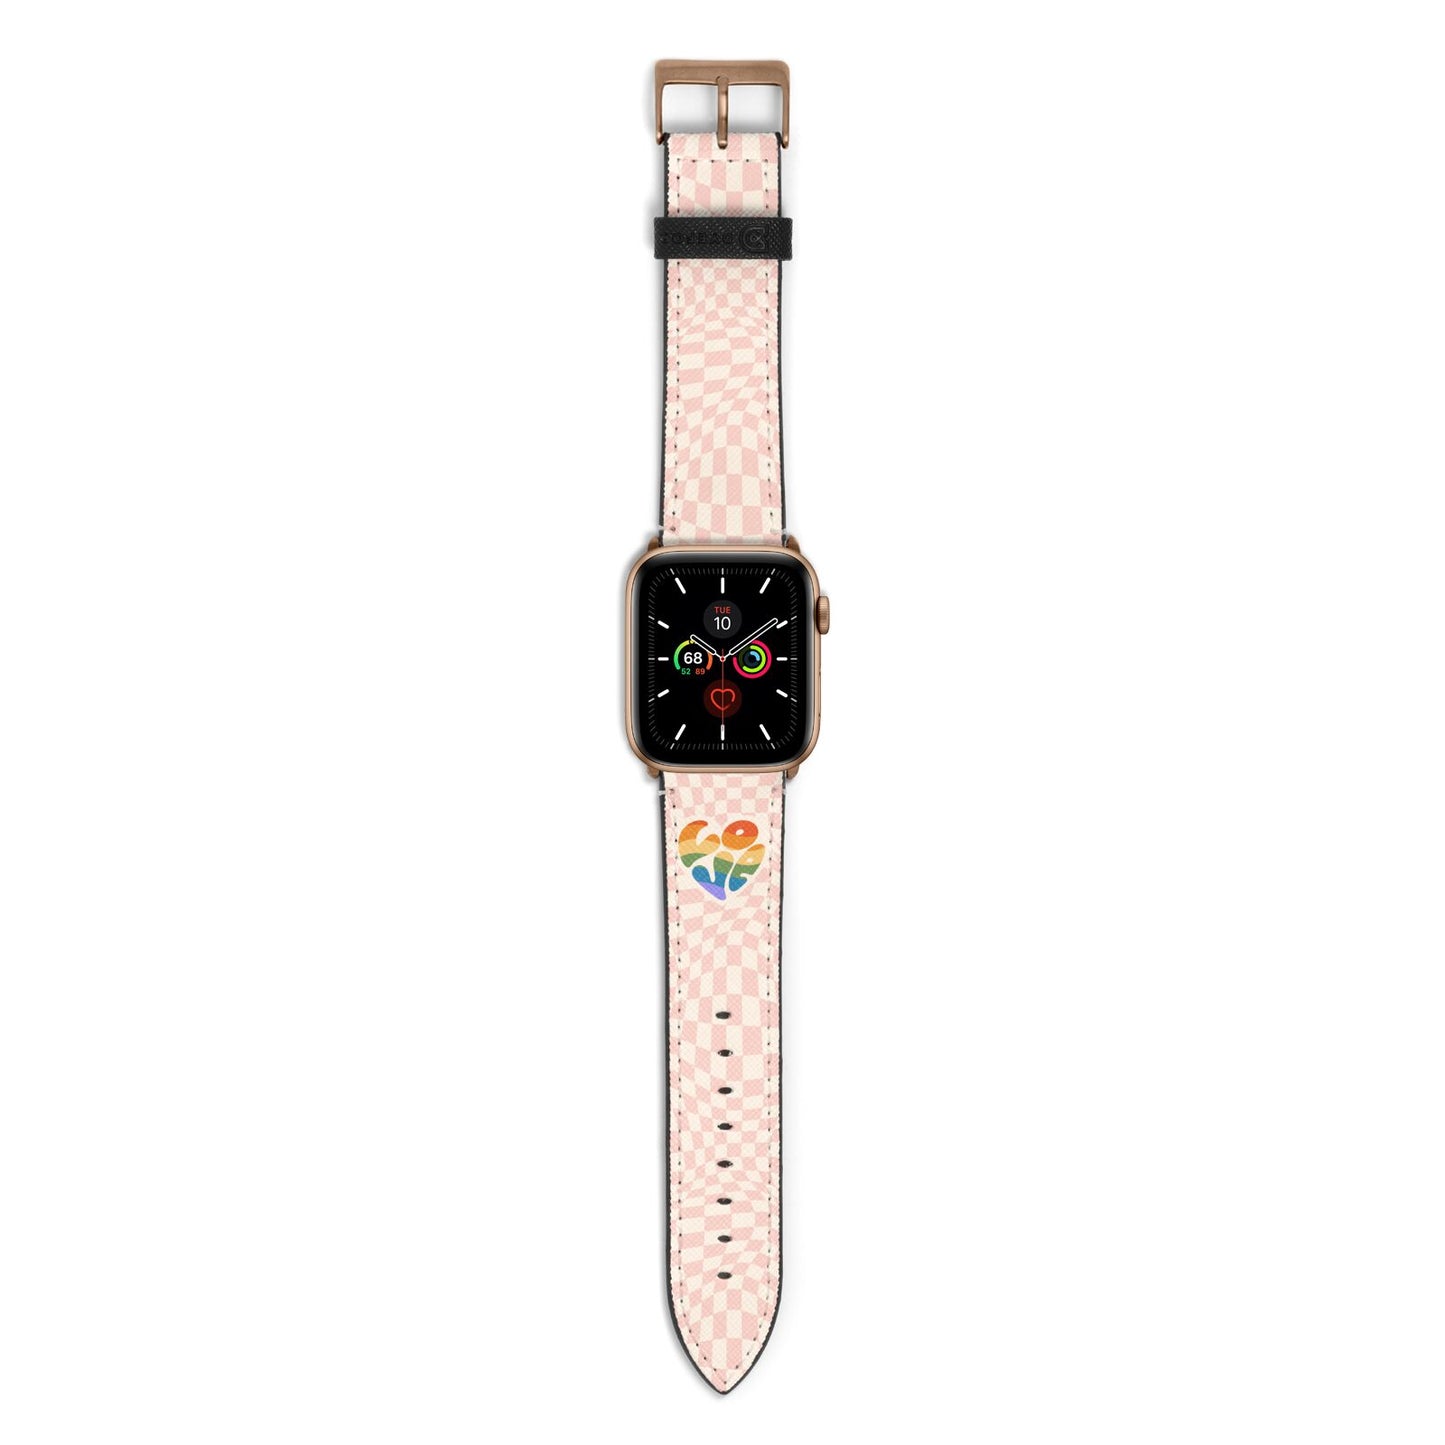 Pride Apple Watch Strap with Gold Hardware